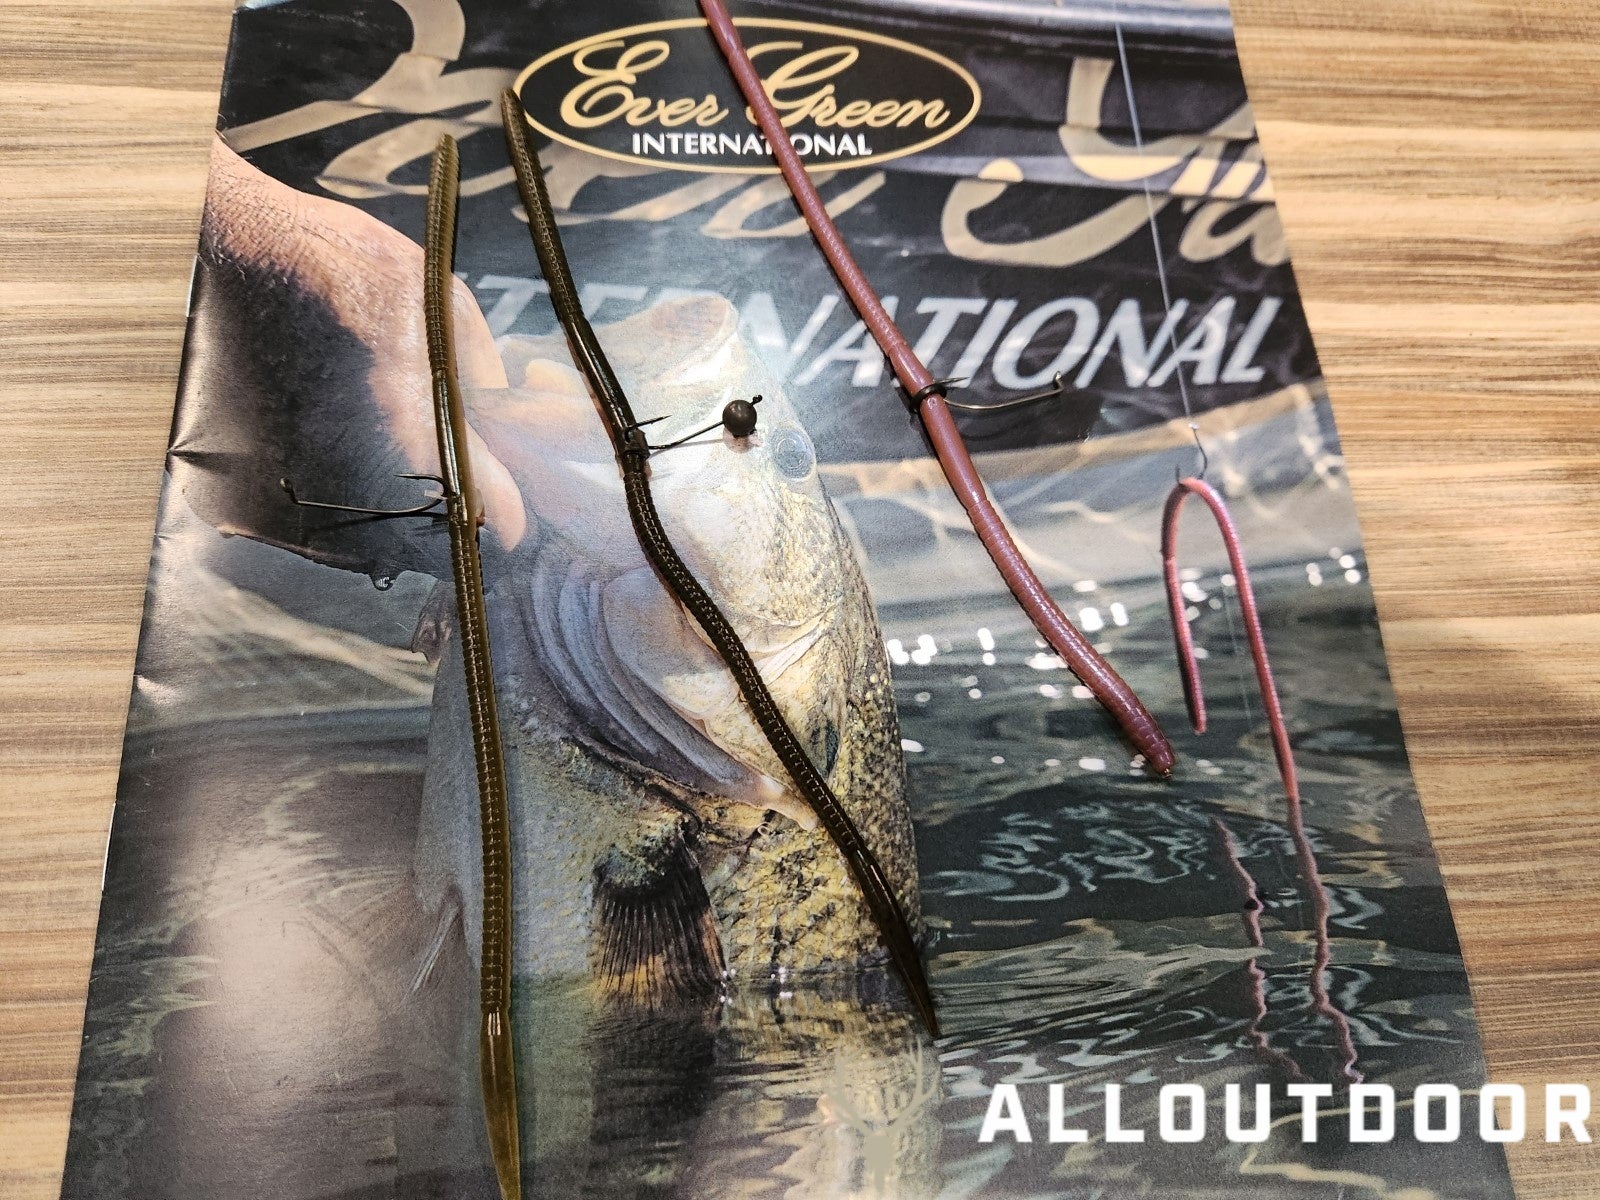 ICAST 2023] The Bow Worm Noodle from Ever Green International